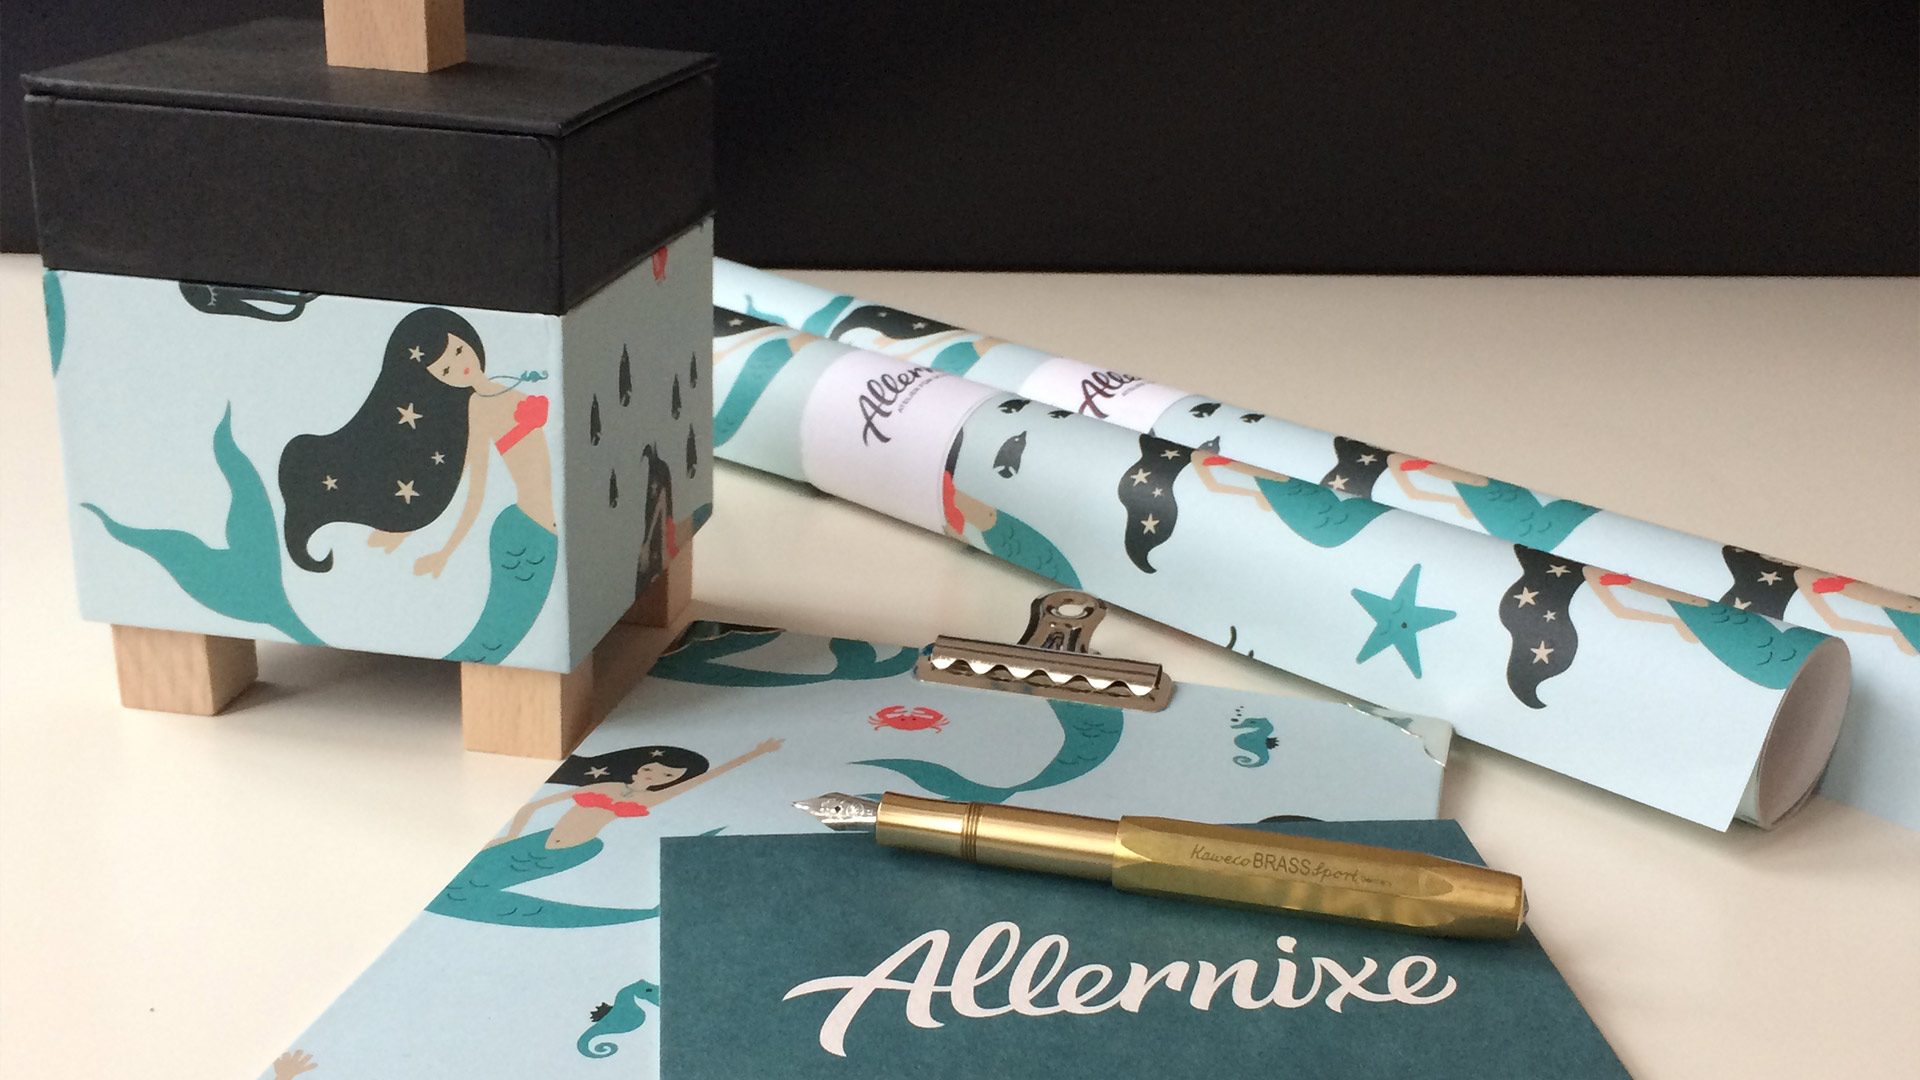 Allernixe - The Shop and Studio for Beautiful Things